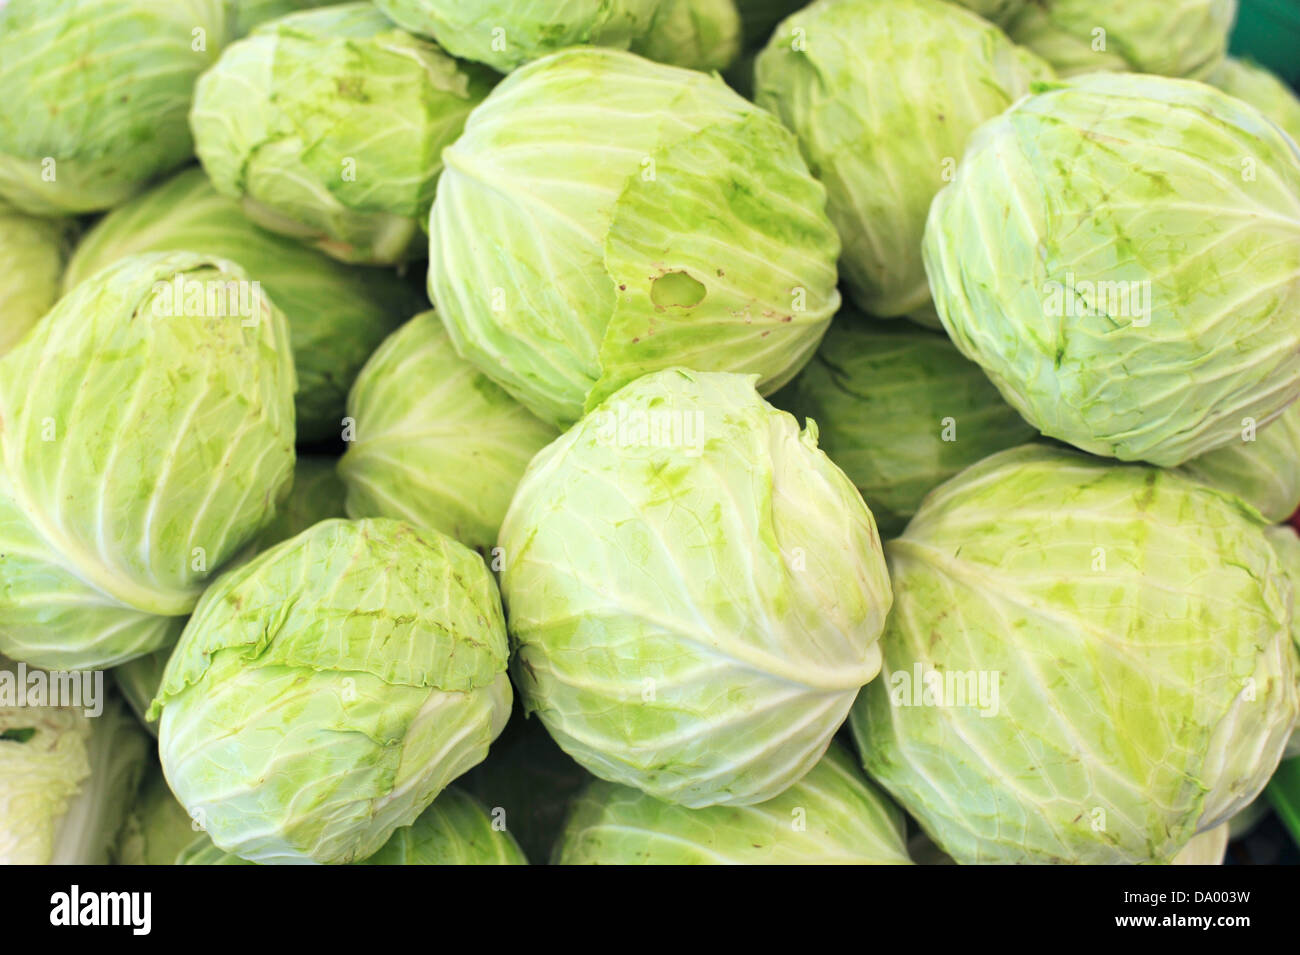 Cabbage in Market Stock Photo